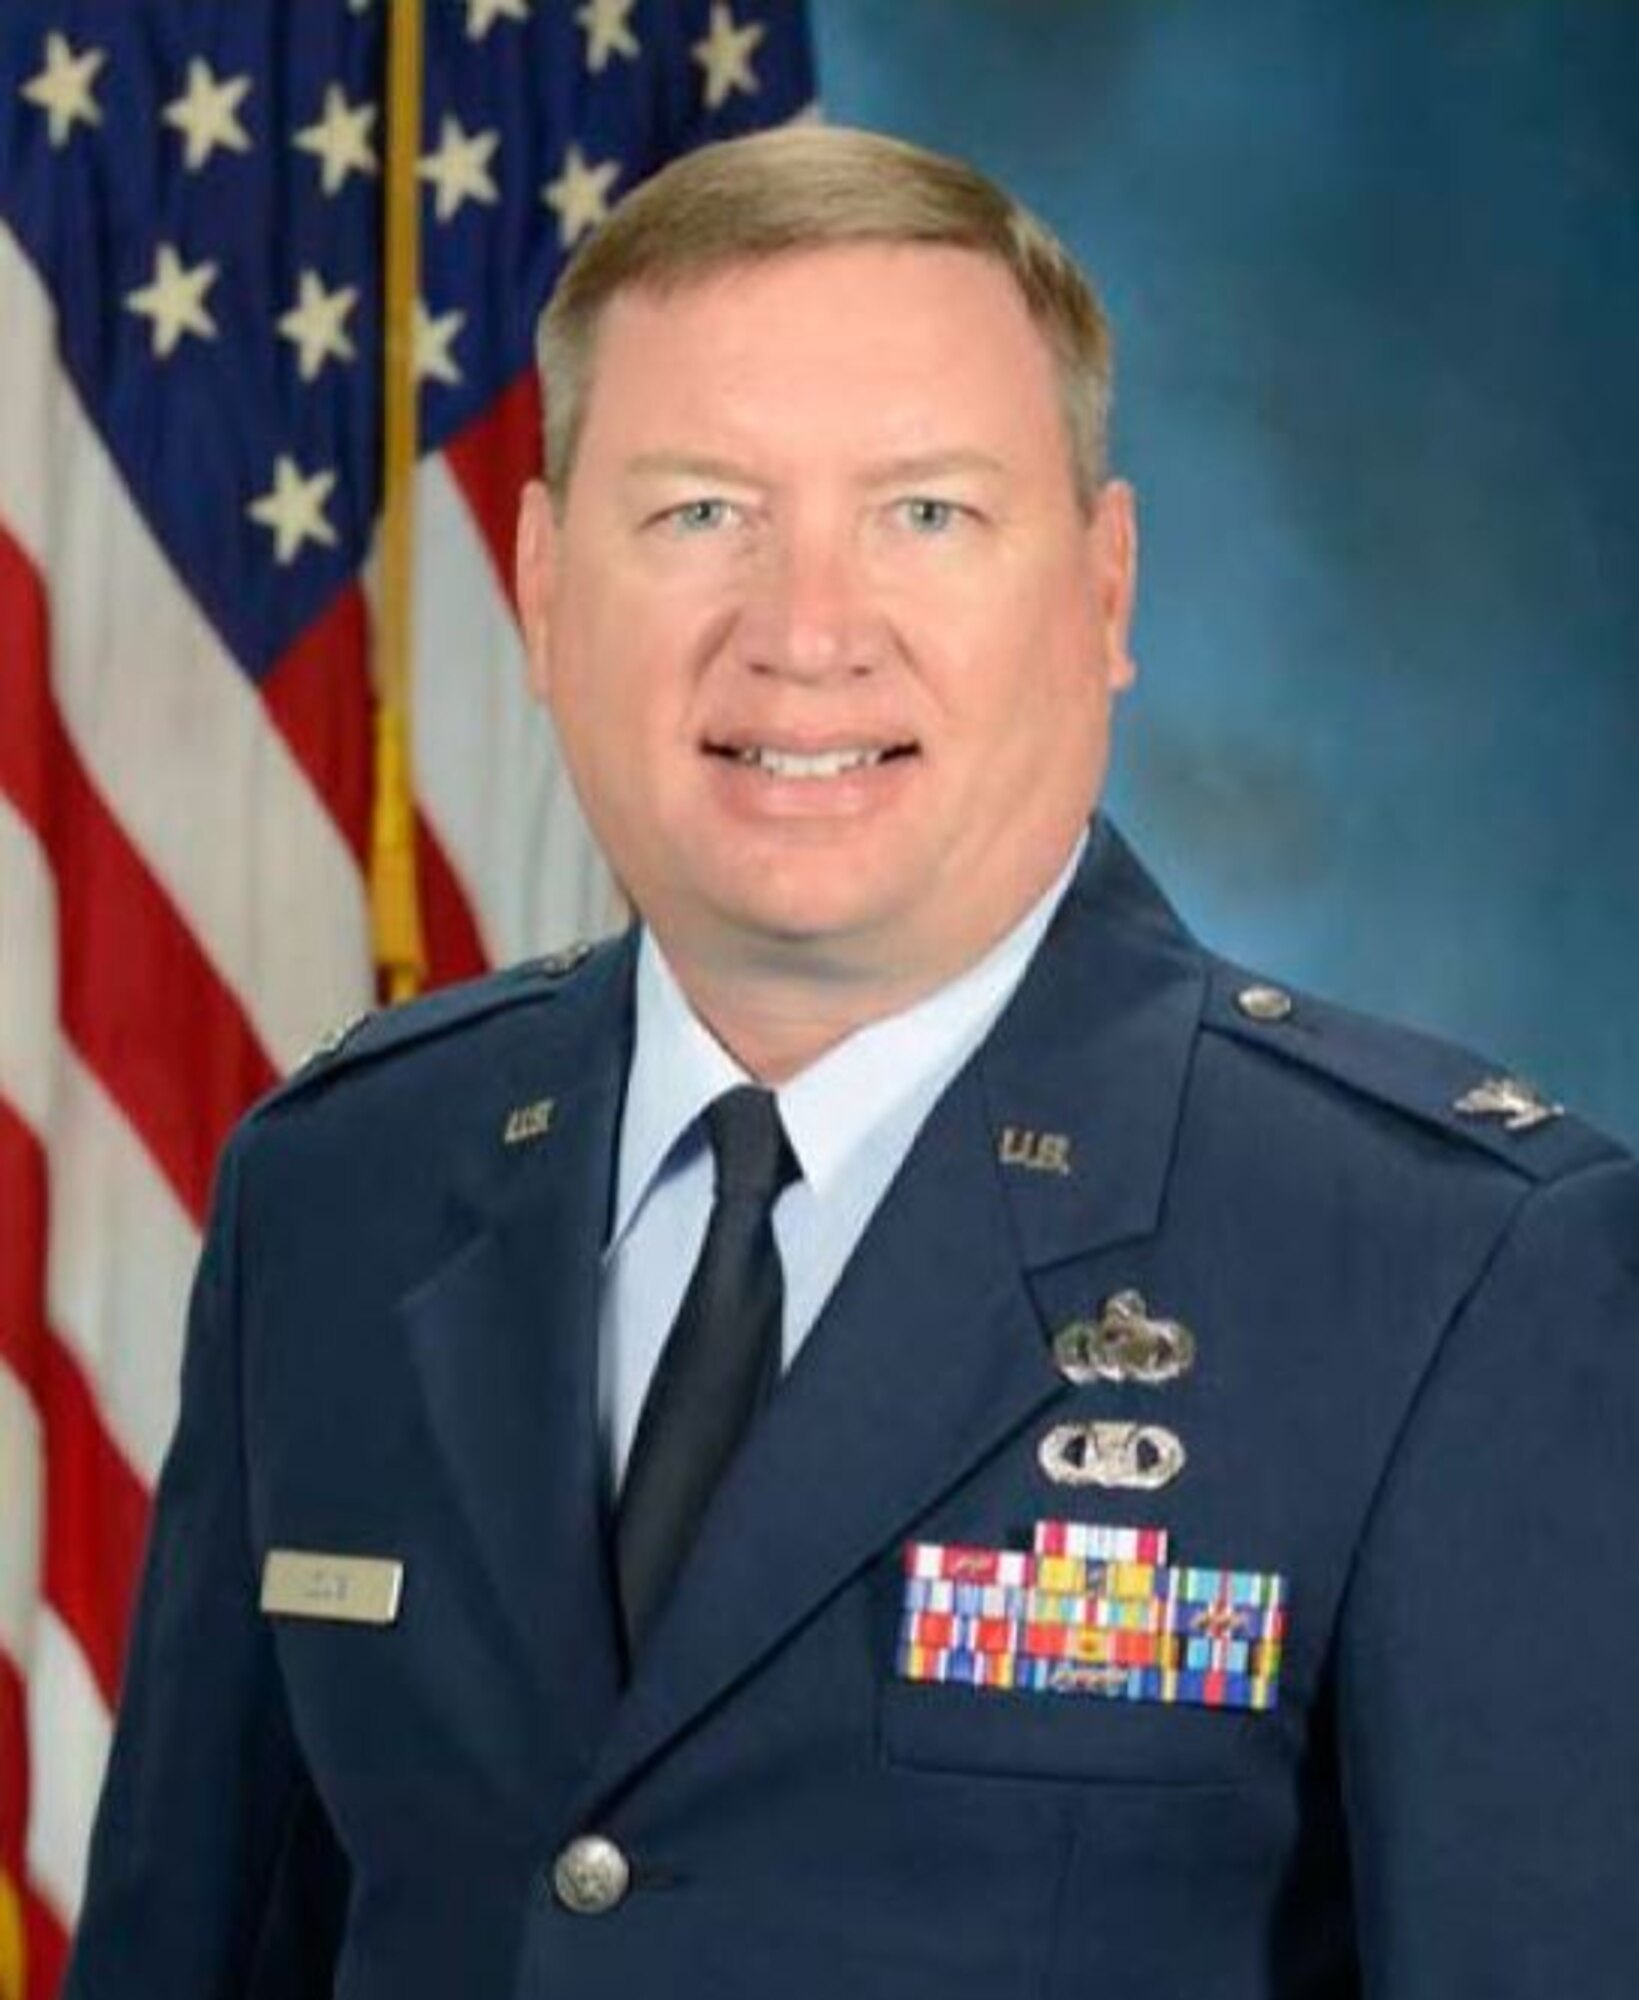 Col. Shane Louis, senior materiel leader, Aerial Networks Division, was named the Air Force Life Cycle Management Center 2021 Boss of the Year. (U.S. Air Force photo by 66th Air Base Group Public Affairs)